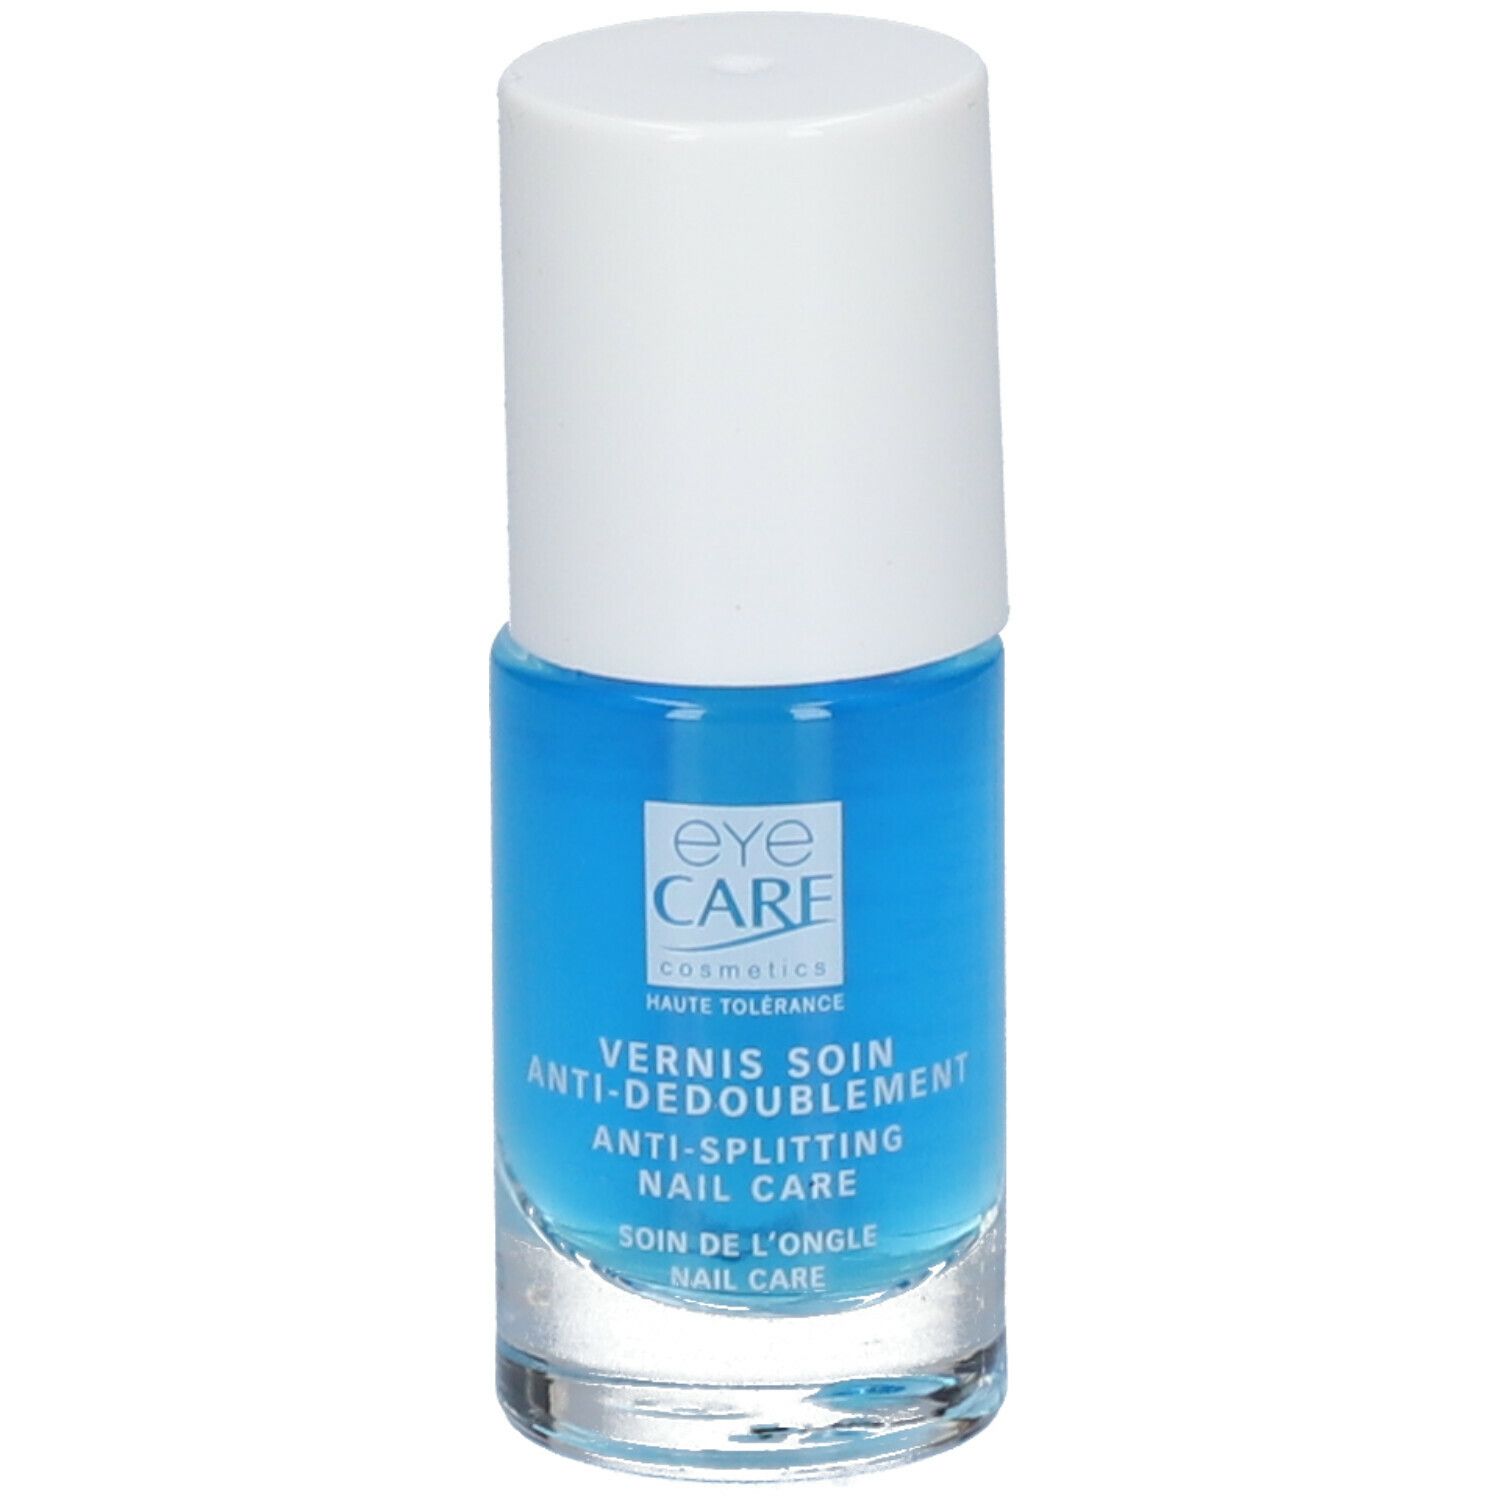 Eye Care Vernis Soin Anti-Dédoublement 804